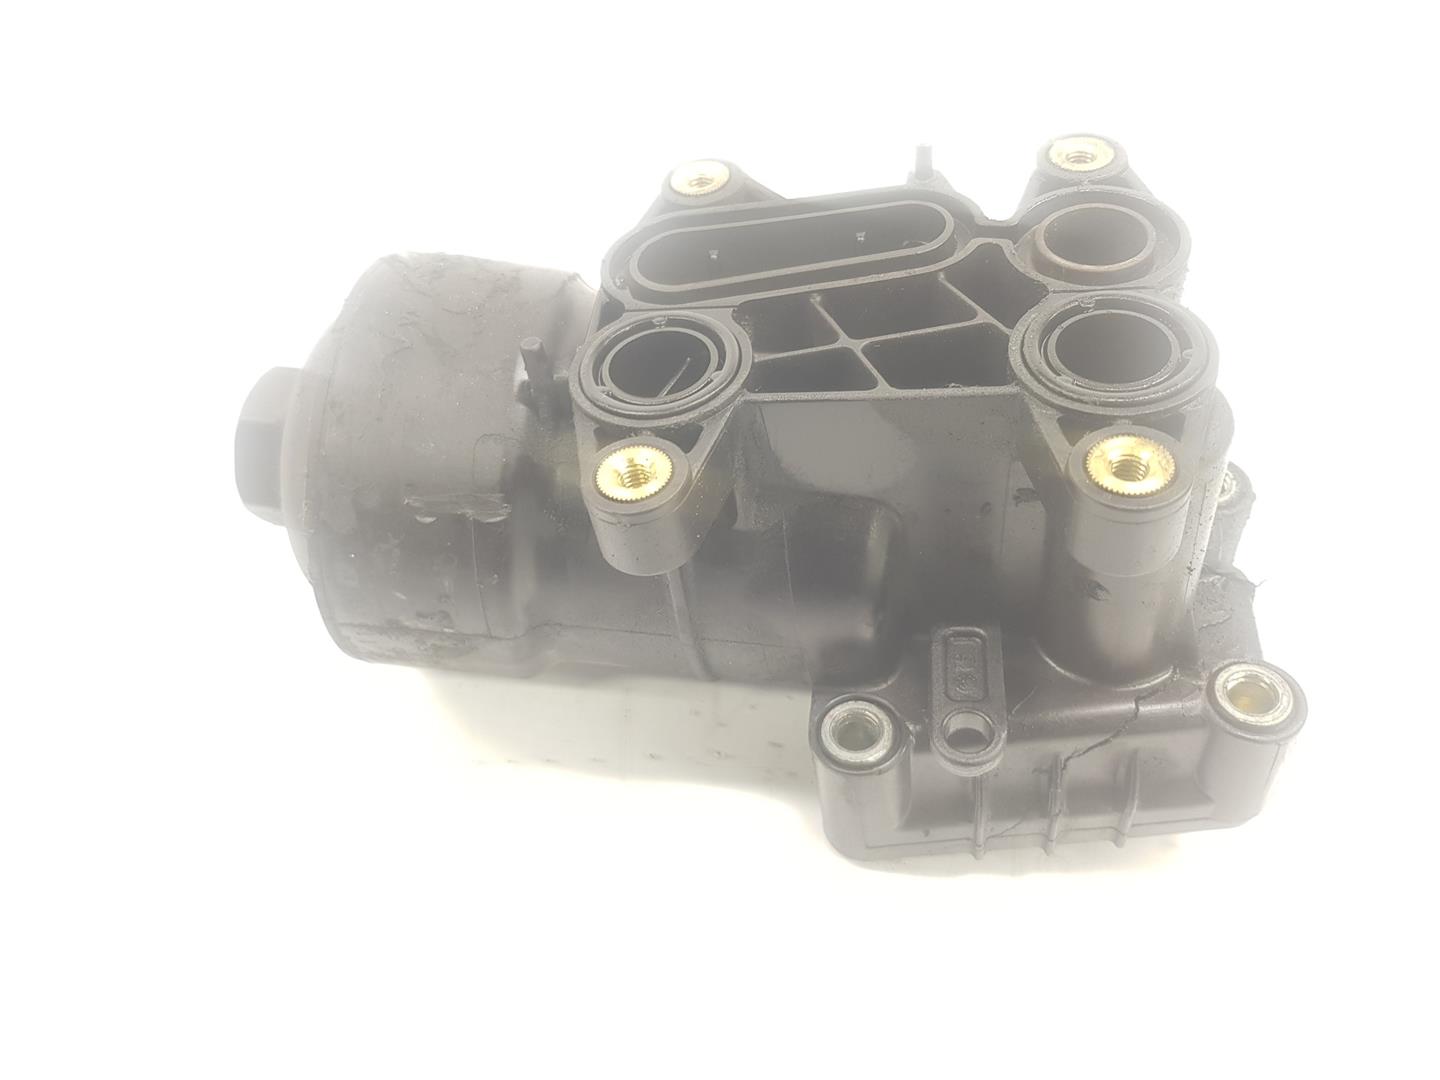 SEAT Ibiza 4 generation (2008-2017) Other Engine Compartment Parts 03L115389C, 03L115433, 1111AA 19933506